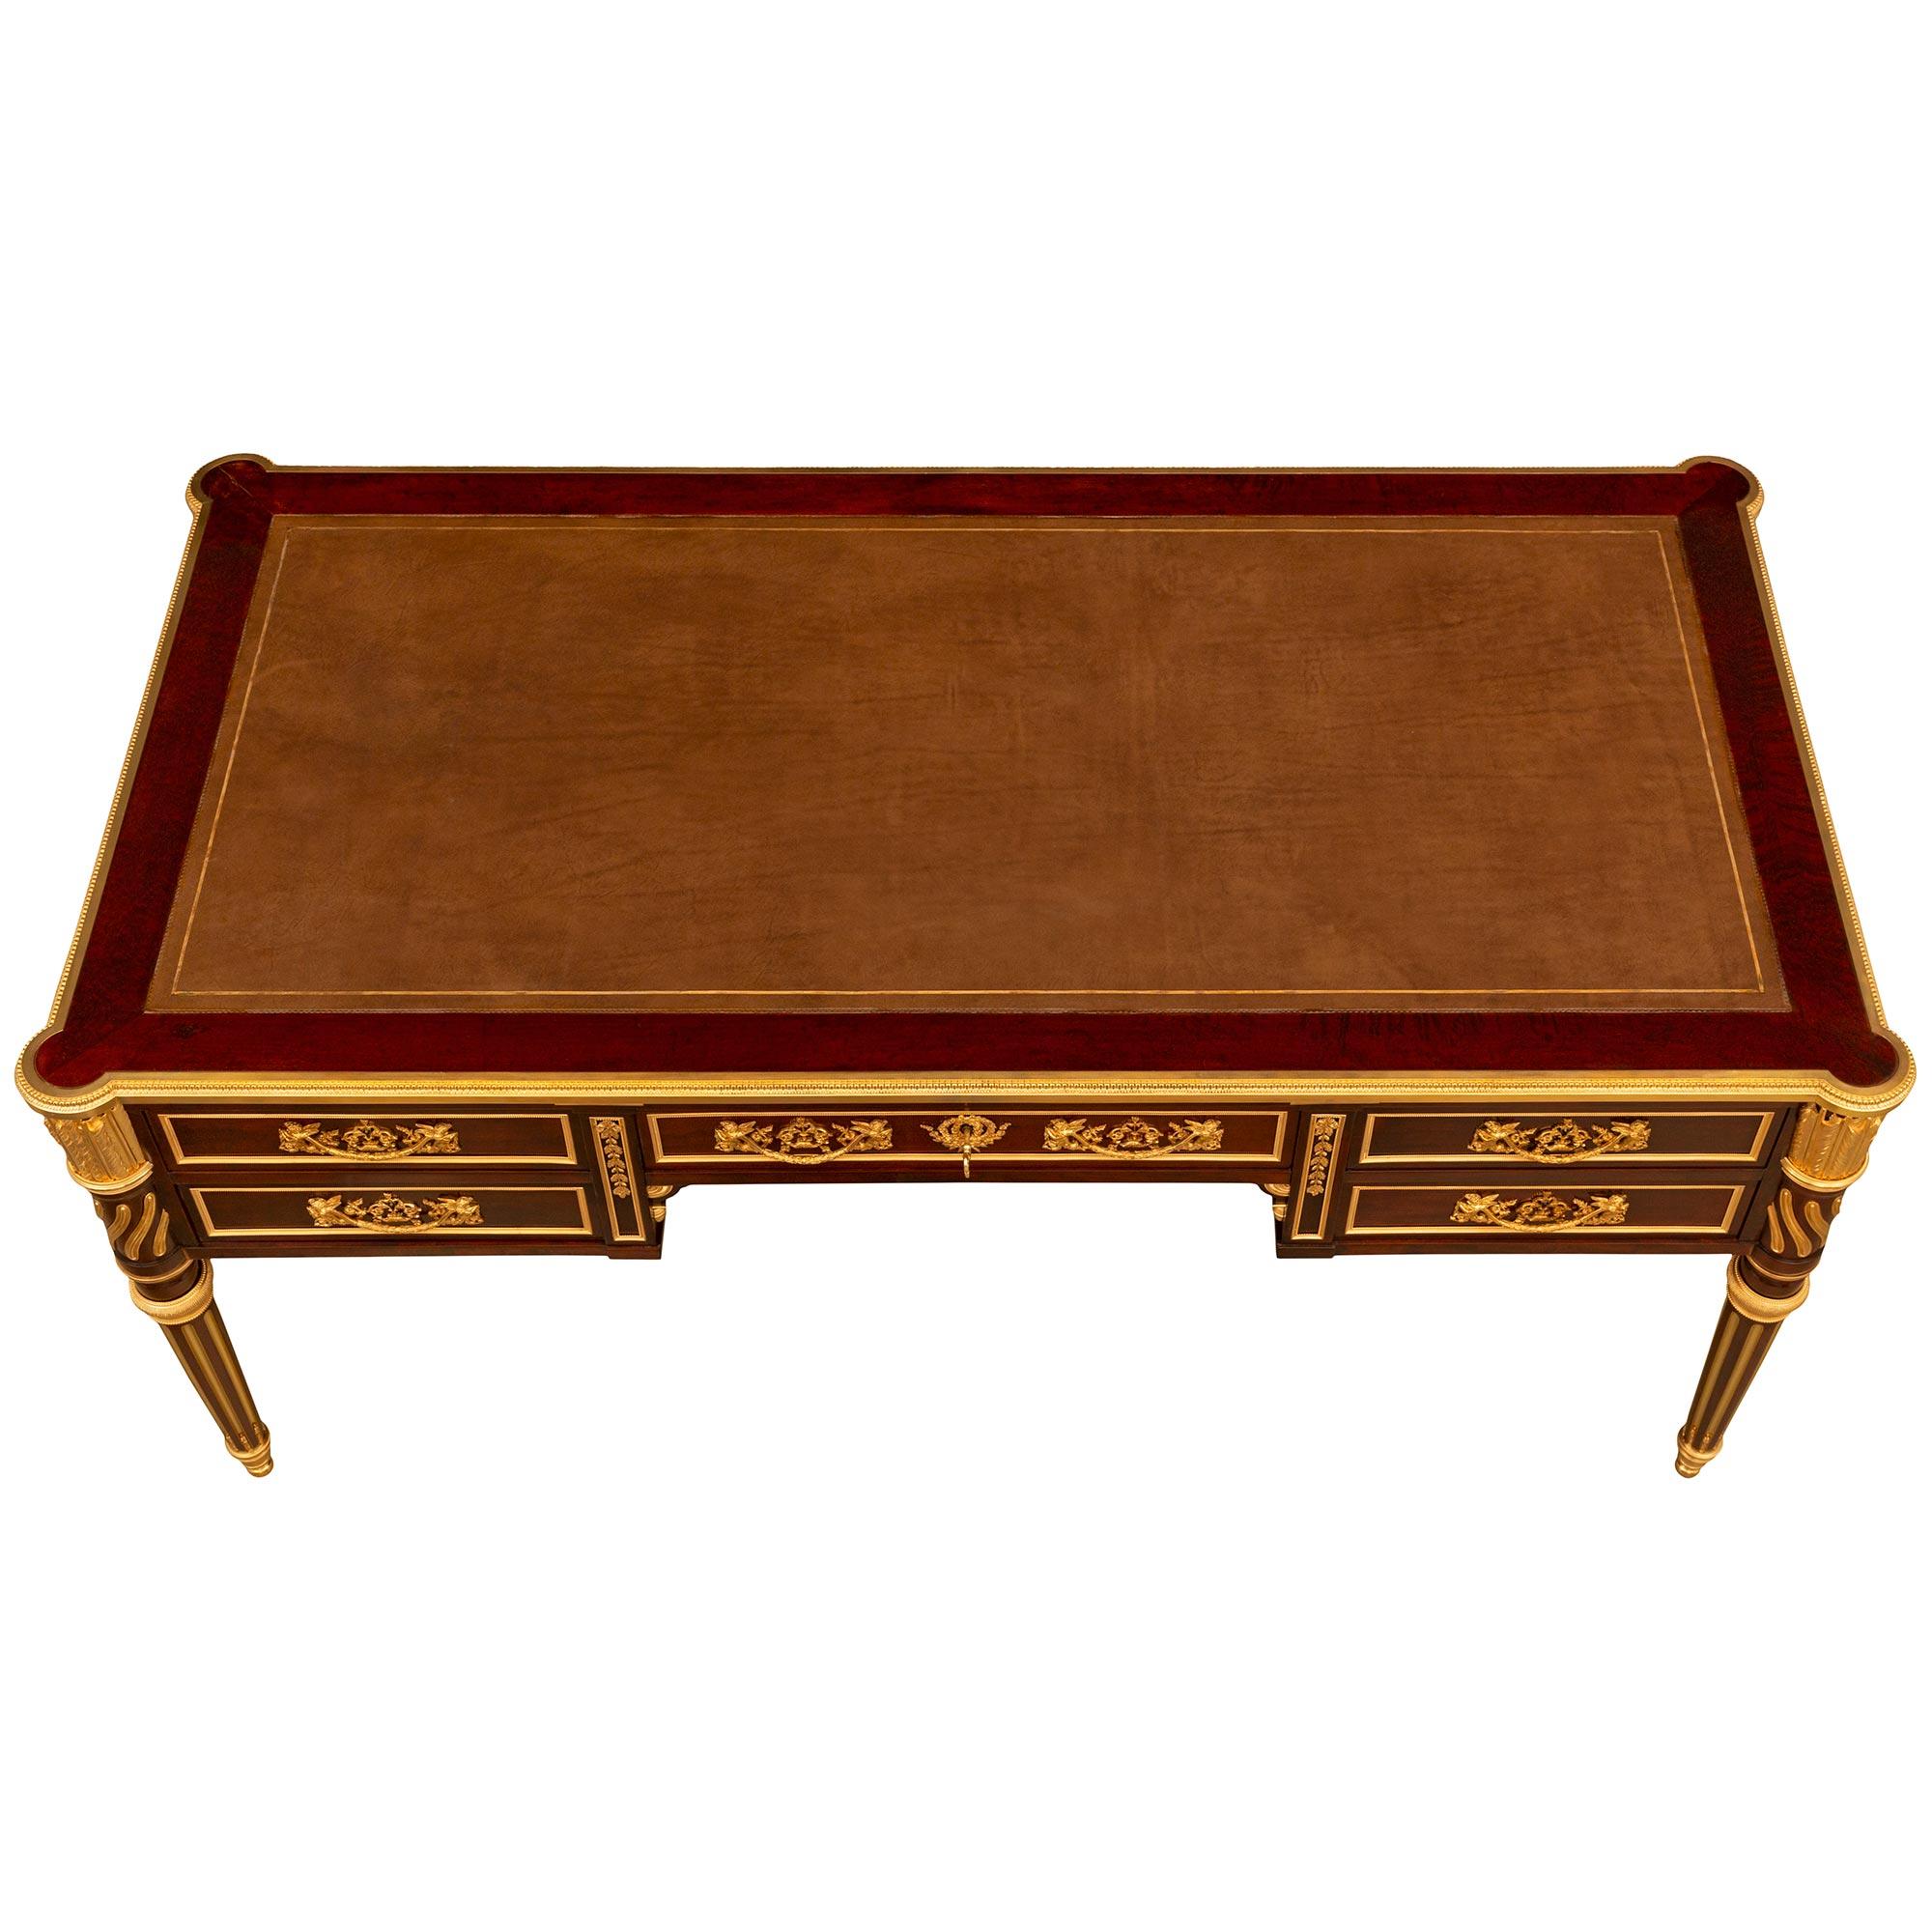 An impressive and high quality French 19th century Louis XVI st. mahogany and ormolu mounted partners desk signed by Victor Raulin. The desk is raised by circular tapered fluted legs ending with topie shaped ormolu sabots. The flutes are elegantly